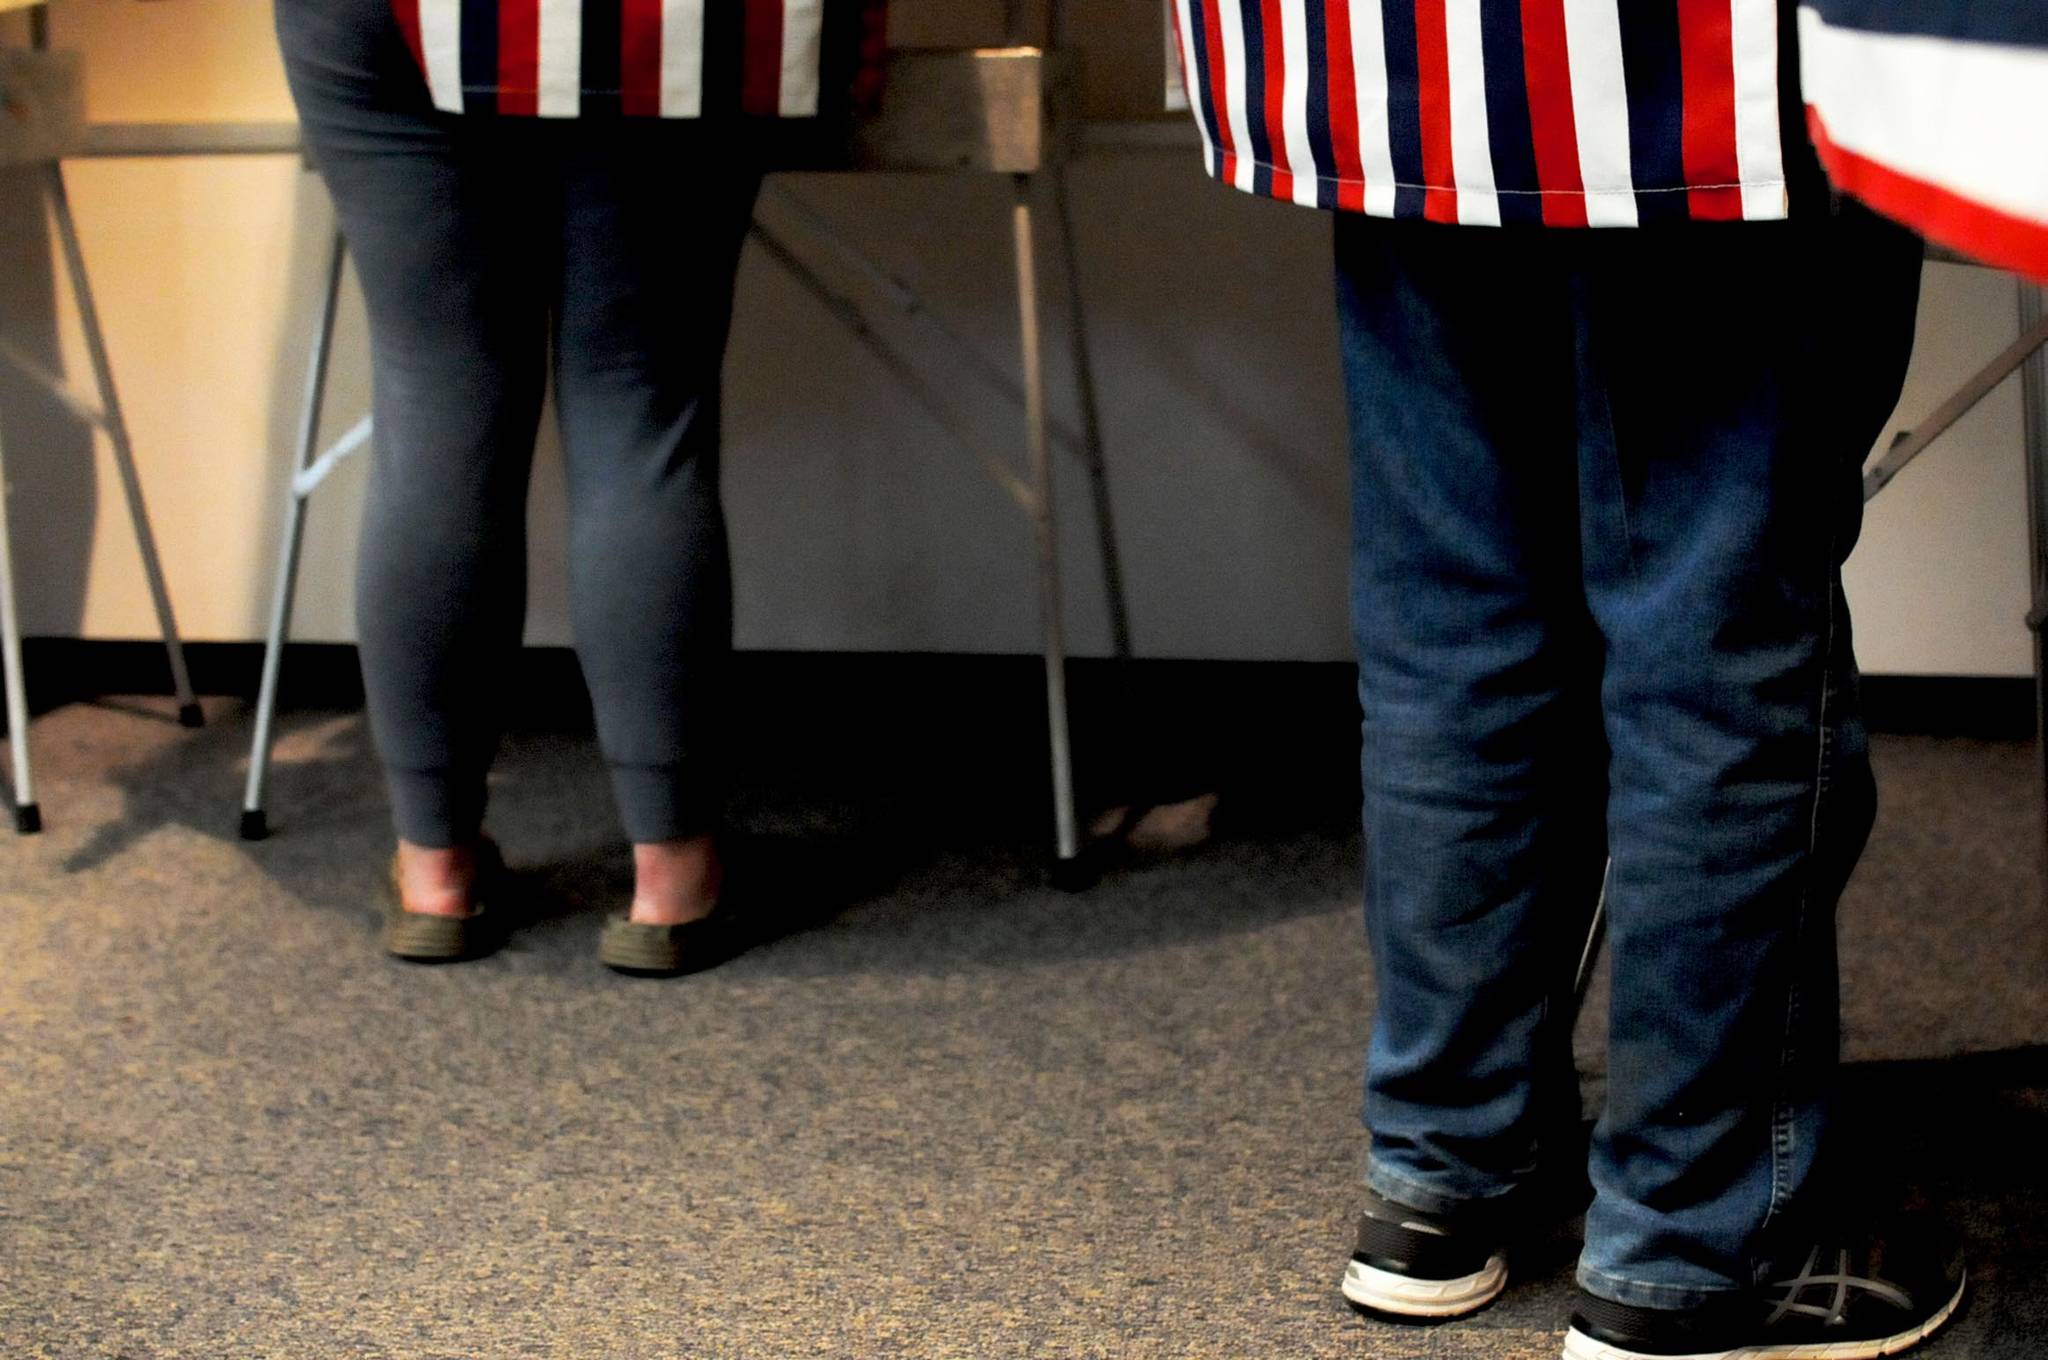 Voters stand in privacy booths inside Soldotna City Hall on Tuesday, Oct. 3, 2017 in Soldotna, Alaska. (Photo by Elizabeth Earl/Peninsula Clarion)